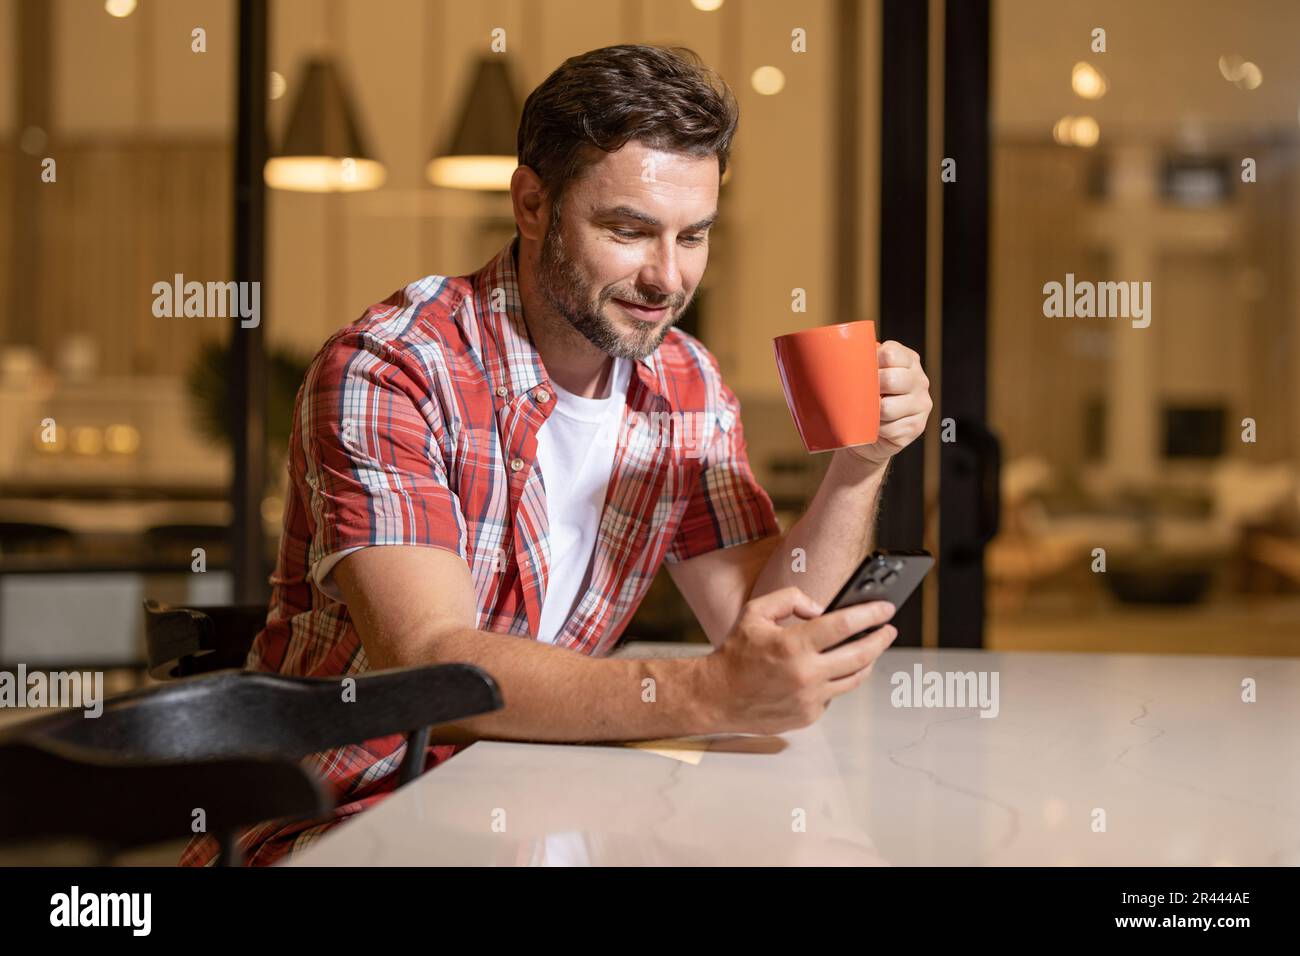 Male hipster using smartphone in concrete basement · Free Stock Photo